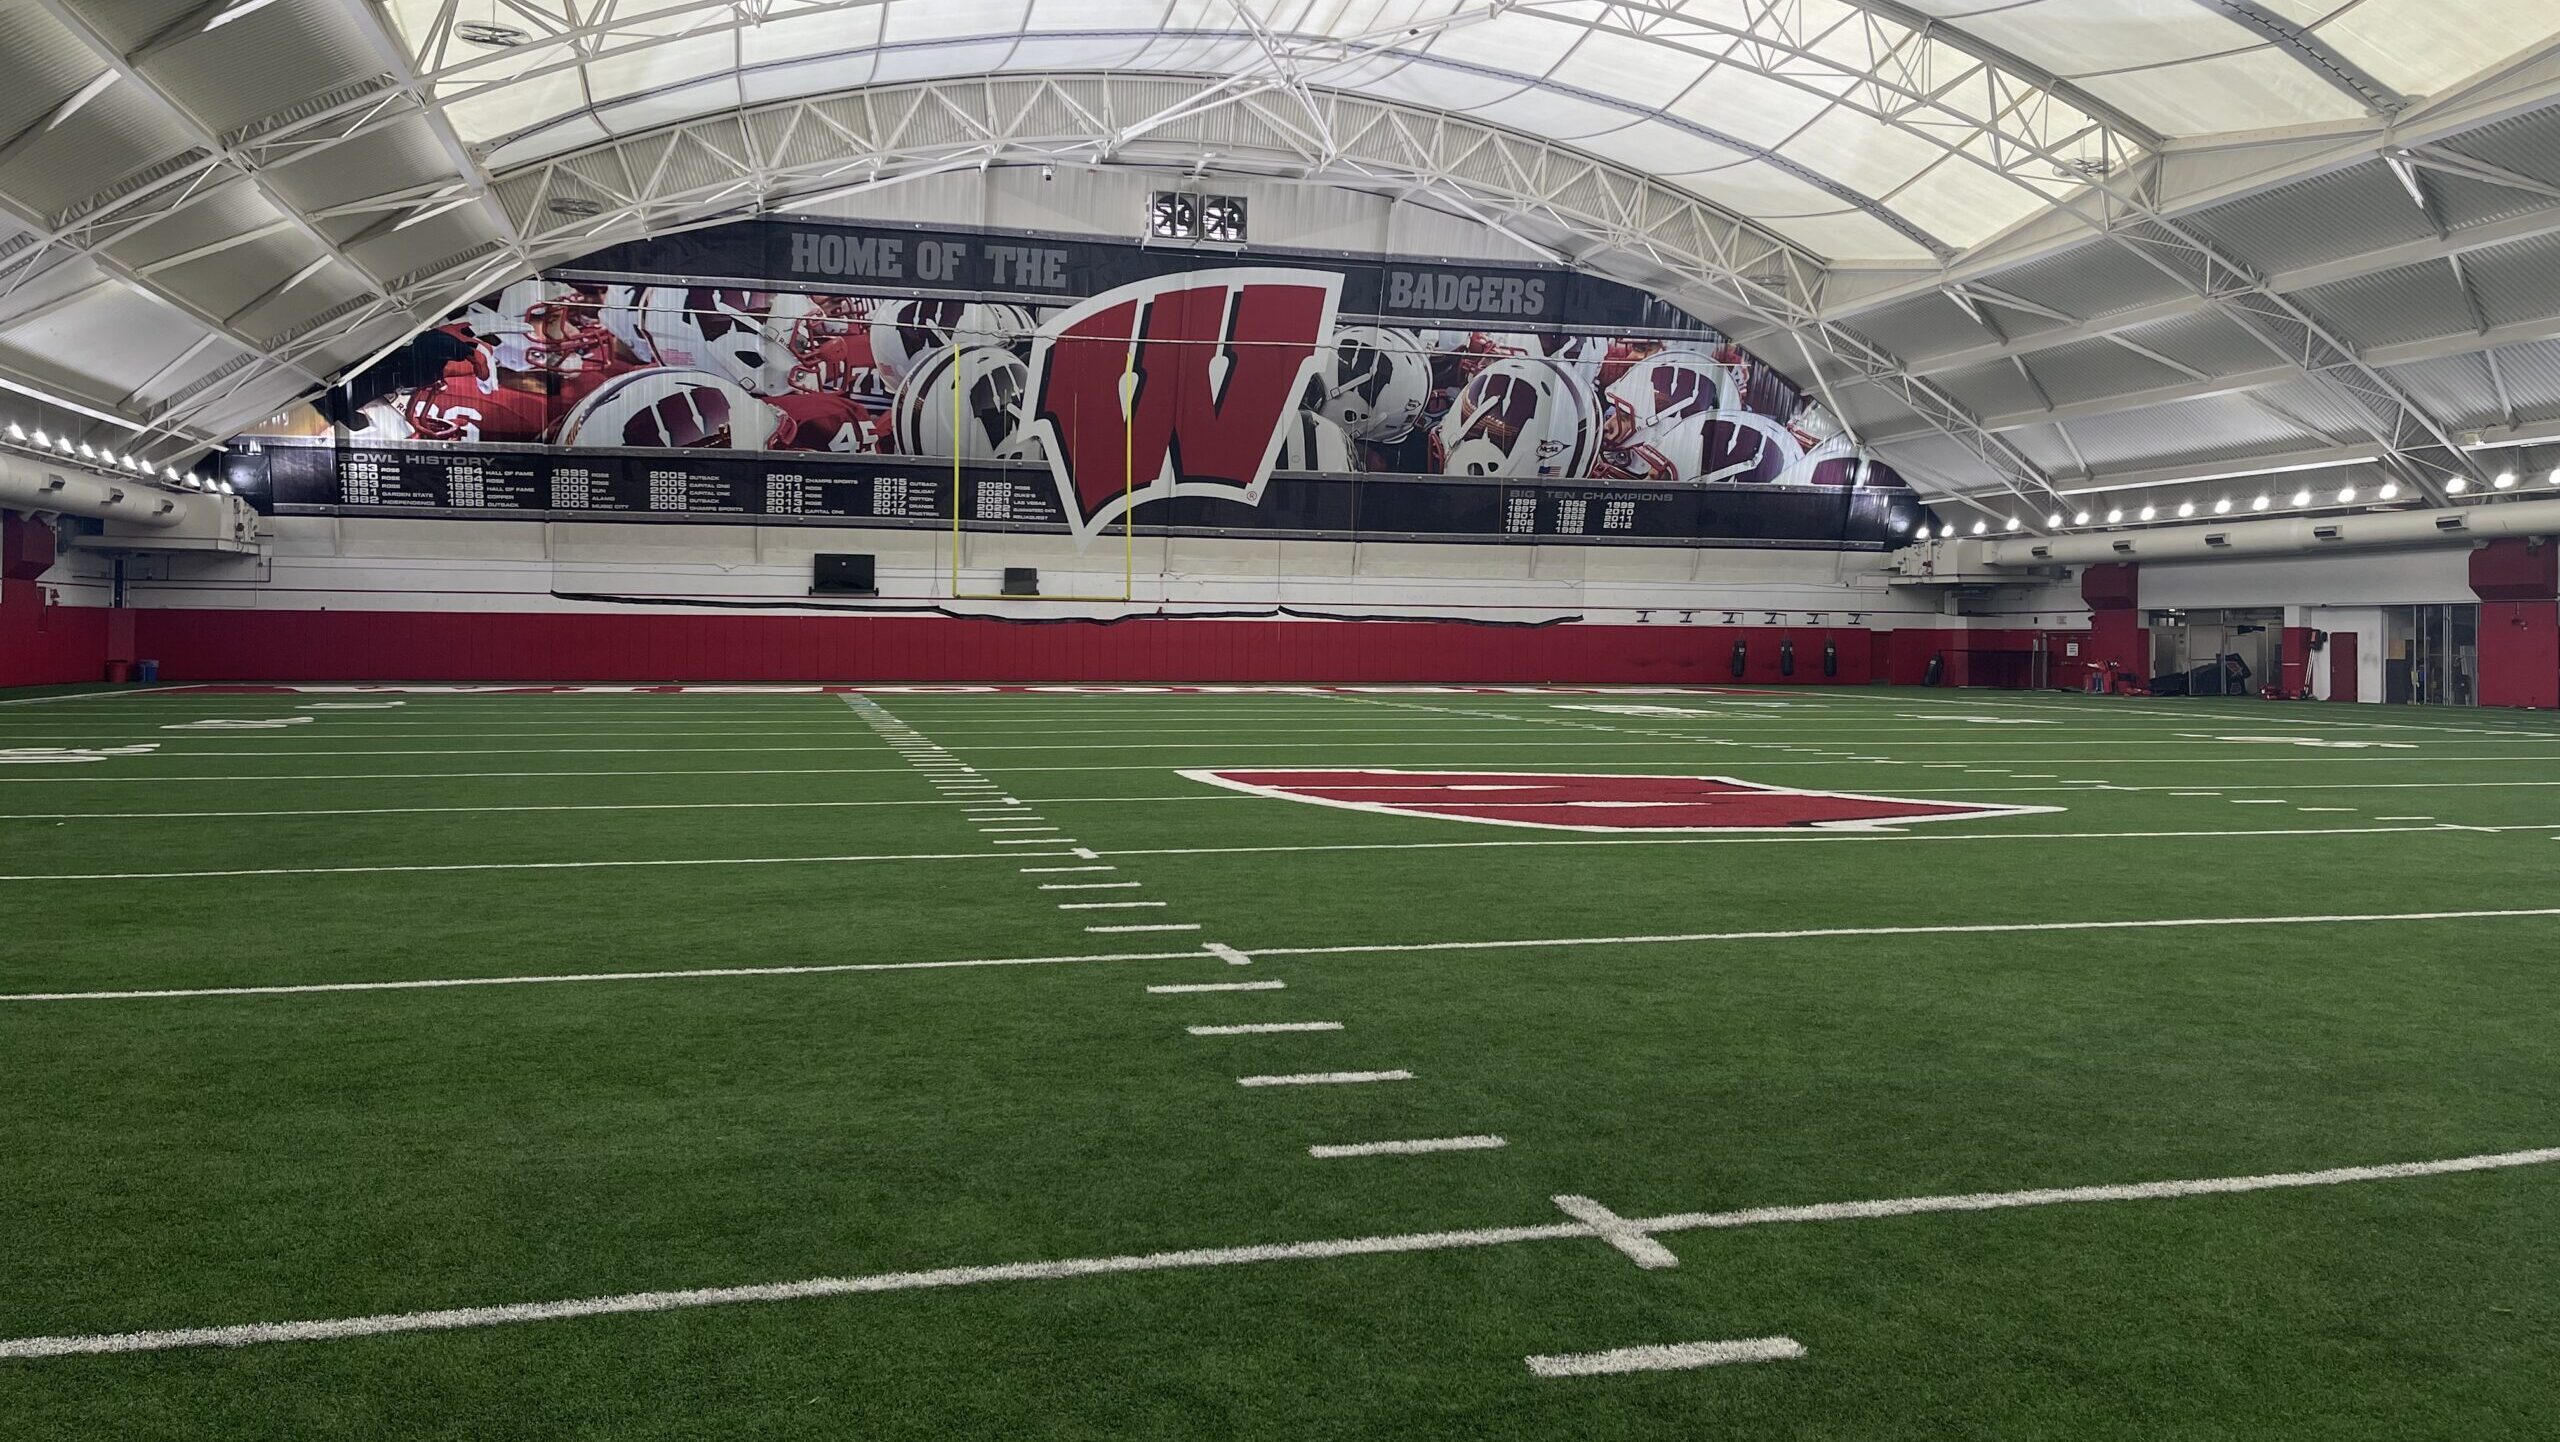 Wisconsin Badgers football practice field: The McClain Center